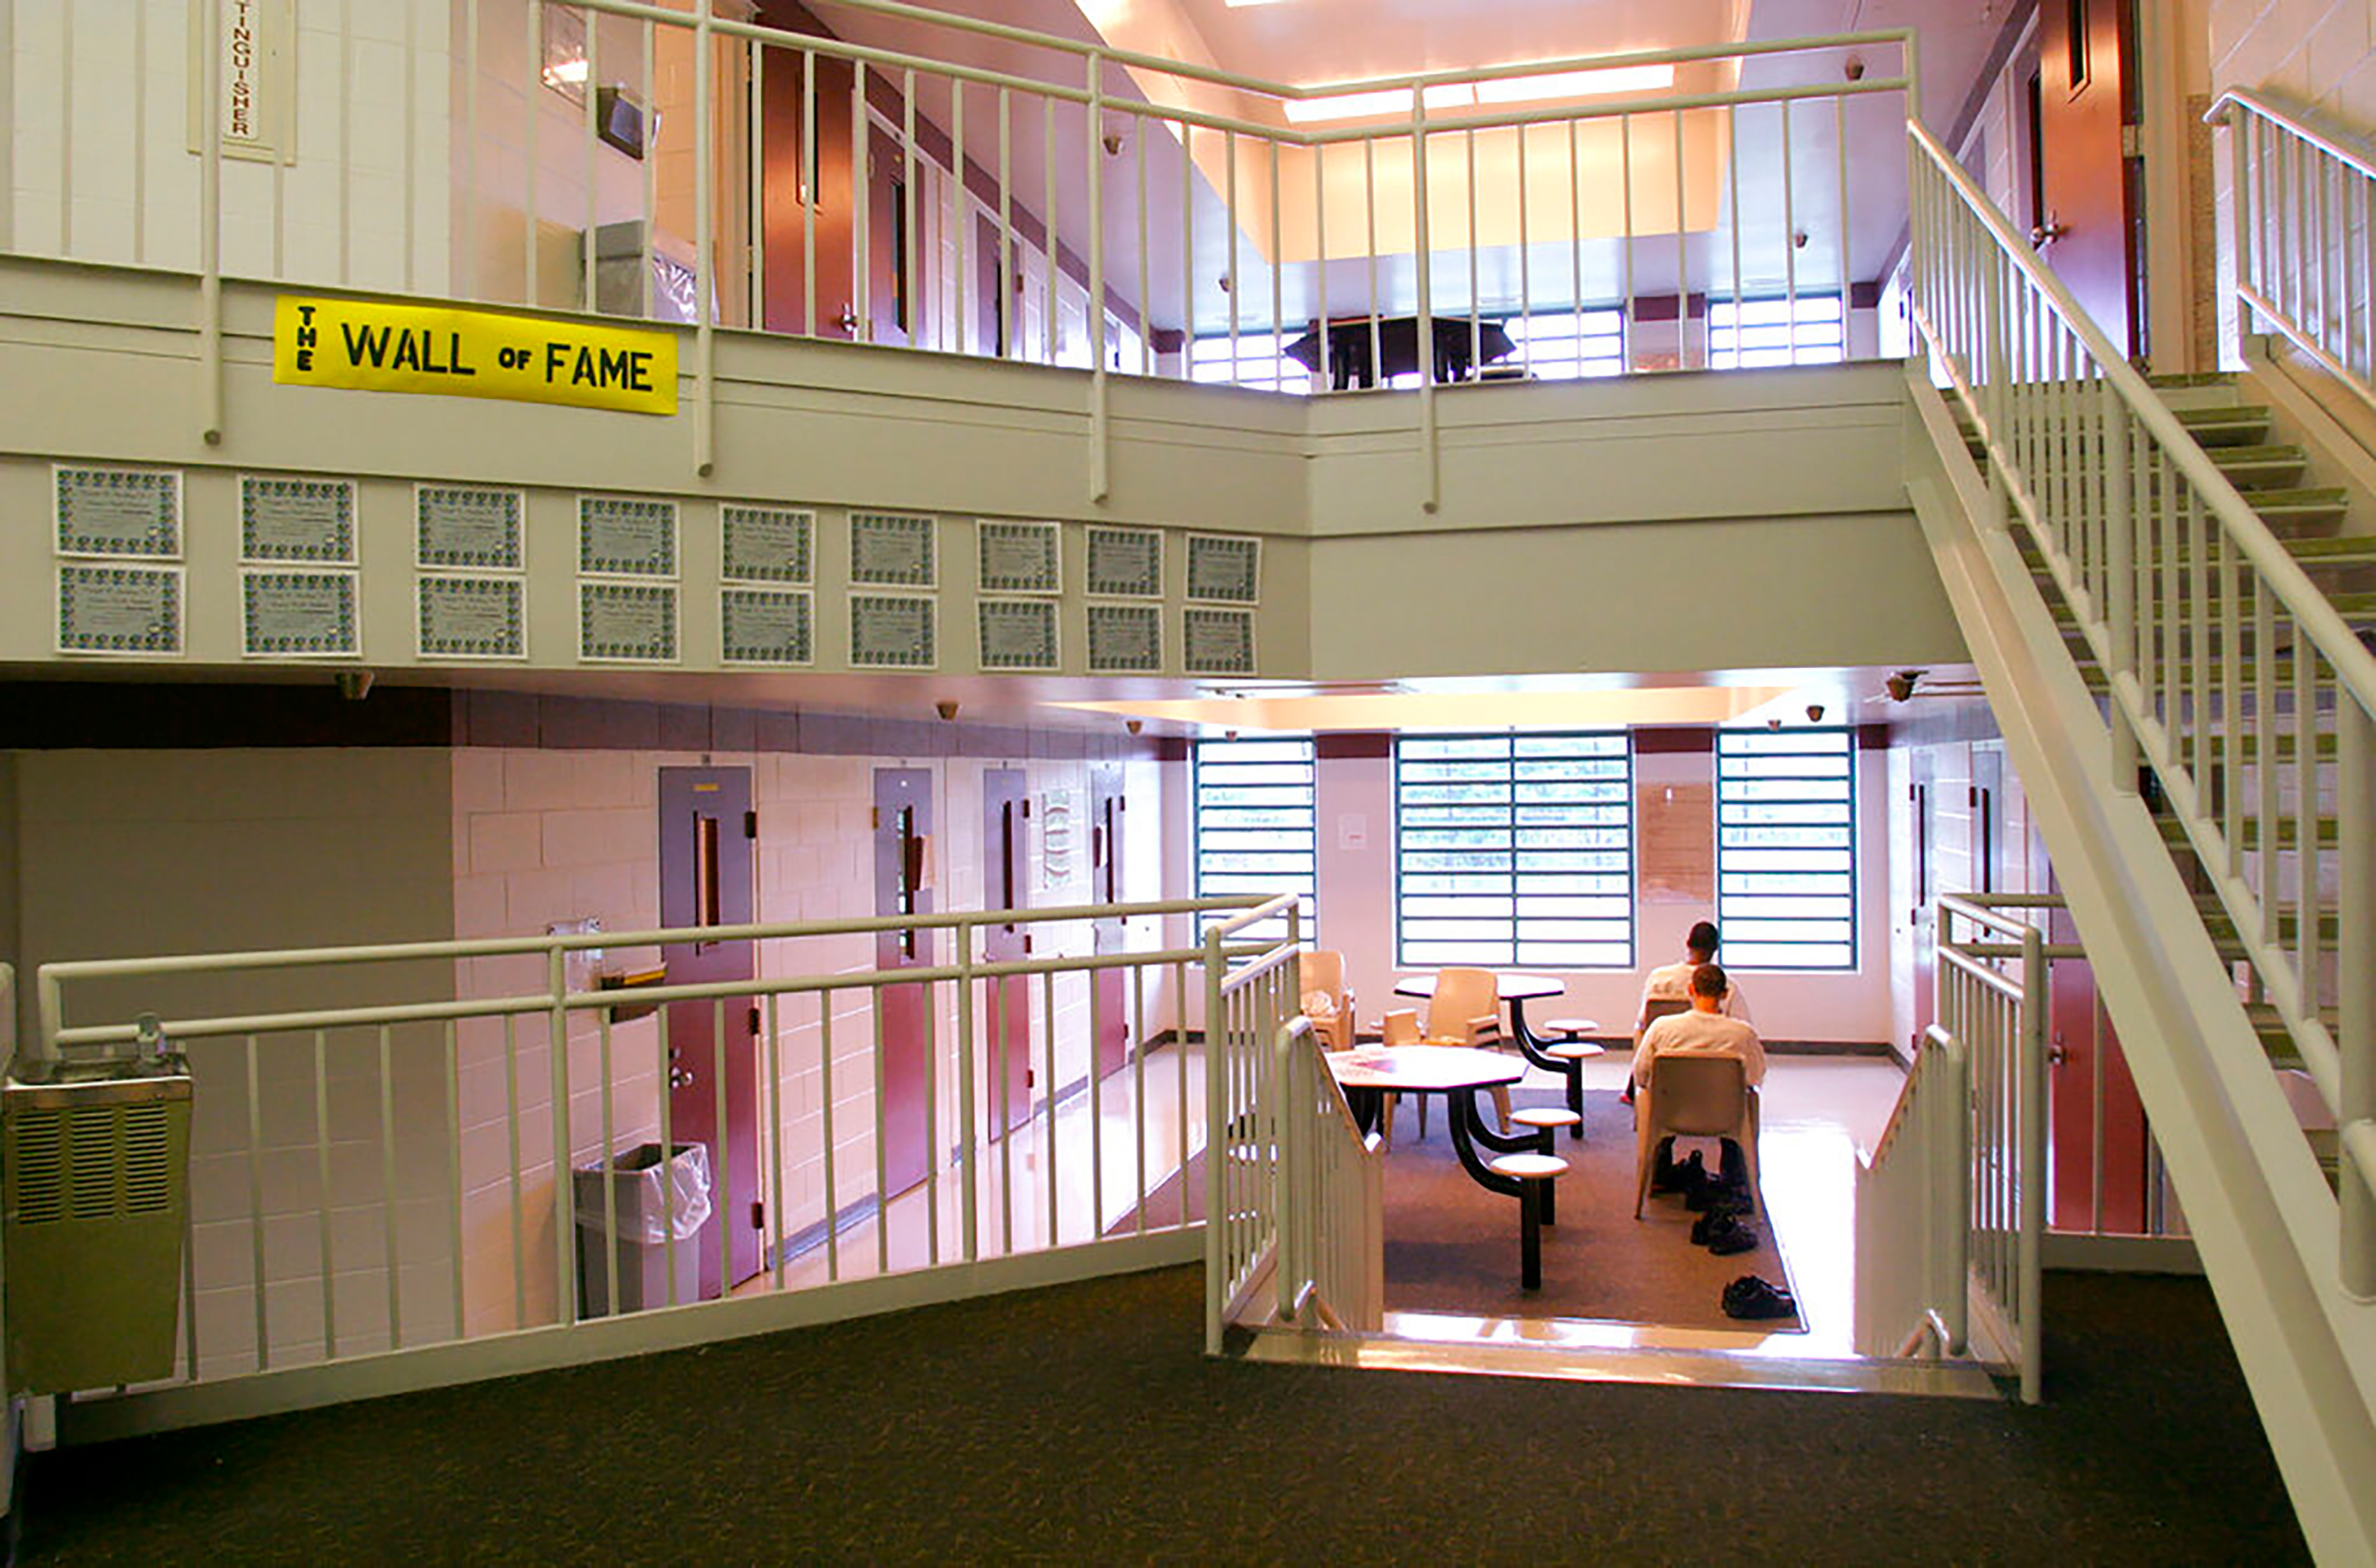 In this May 18, 2004 photo, inmates sit in one of the cottages at the Circleville Juvenile Correctional Facility in Circleville, Ohio. A report released Friday April 23, 2021 that looked at the death of 17-year-old Robert Wright in August of 2020, indicated that two juvenile prison guards slept while on duty. One of them failed to properly conduct overnight rounds, and two others failed to conduct timely CPR on the Ohio youth found unresponsive who later died, according to an investigation into the youth's death. (Tim Revell—The Columbus Dispatch/AP)